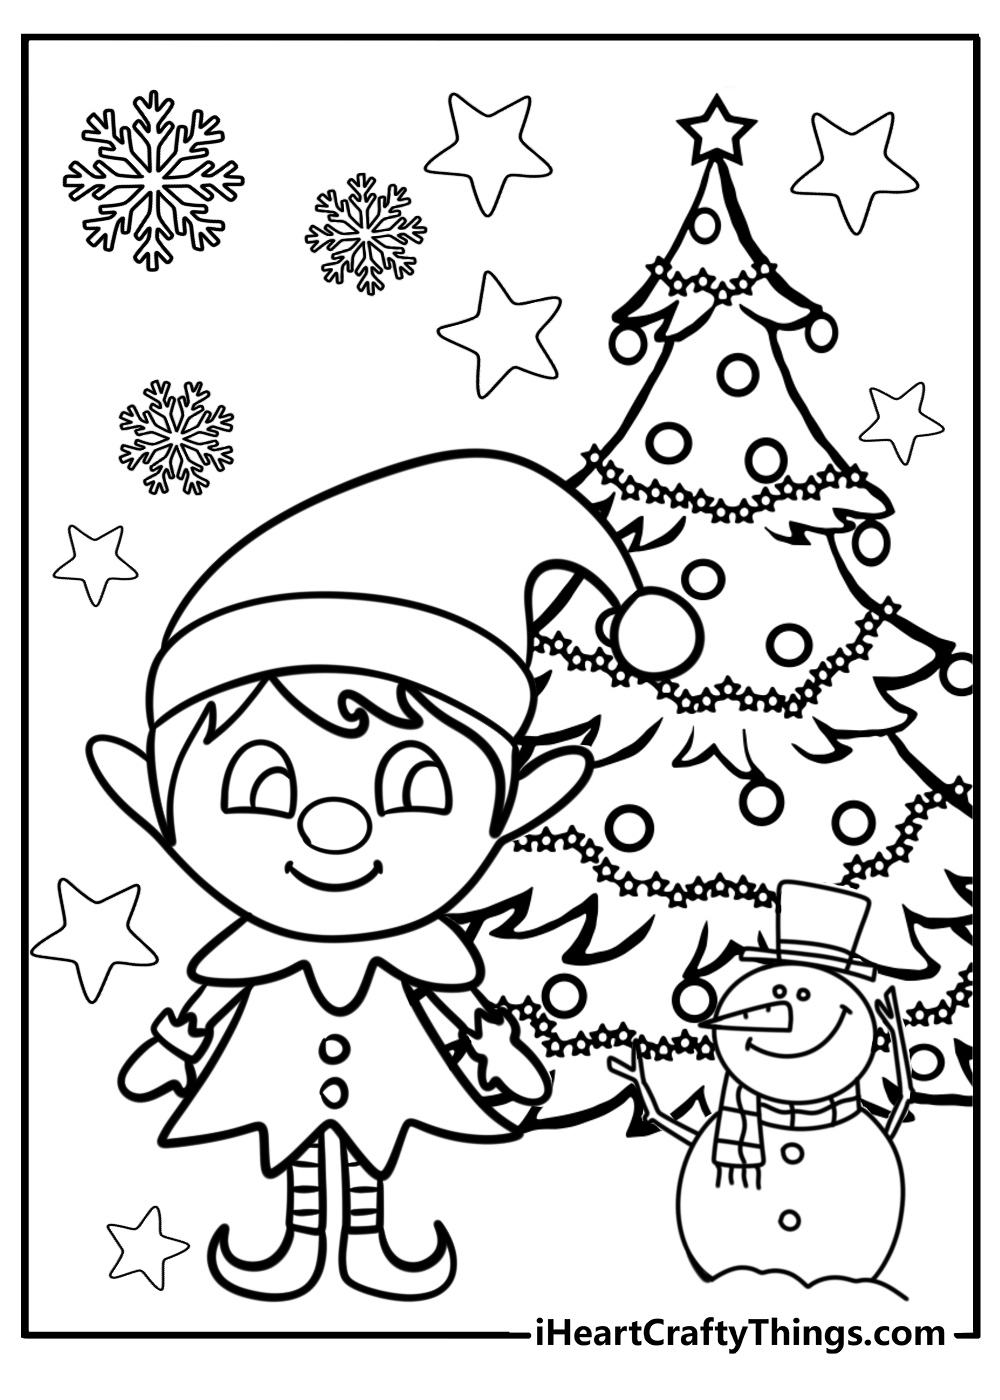 Elves coloring pages for christmas